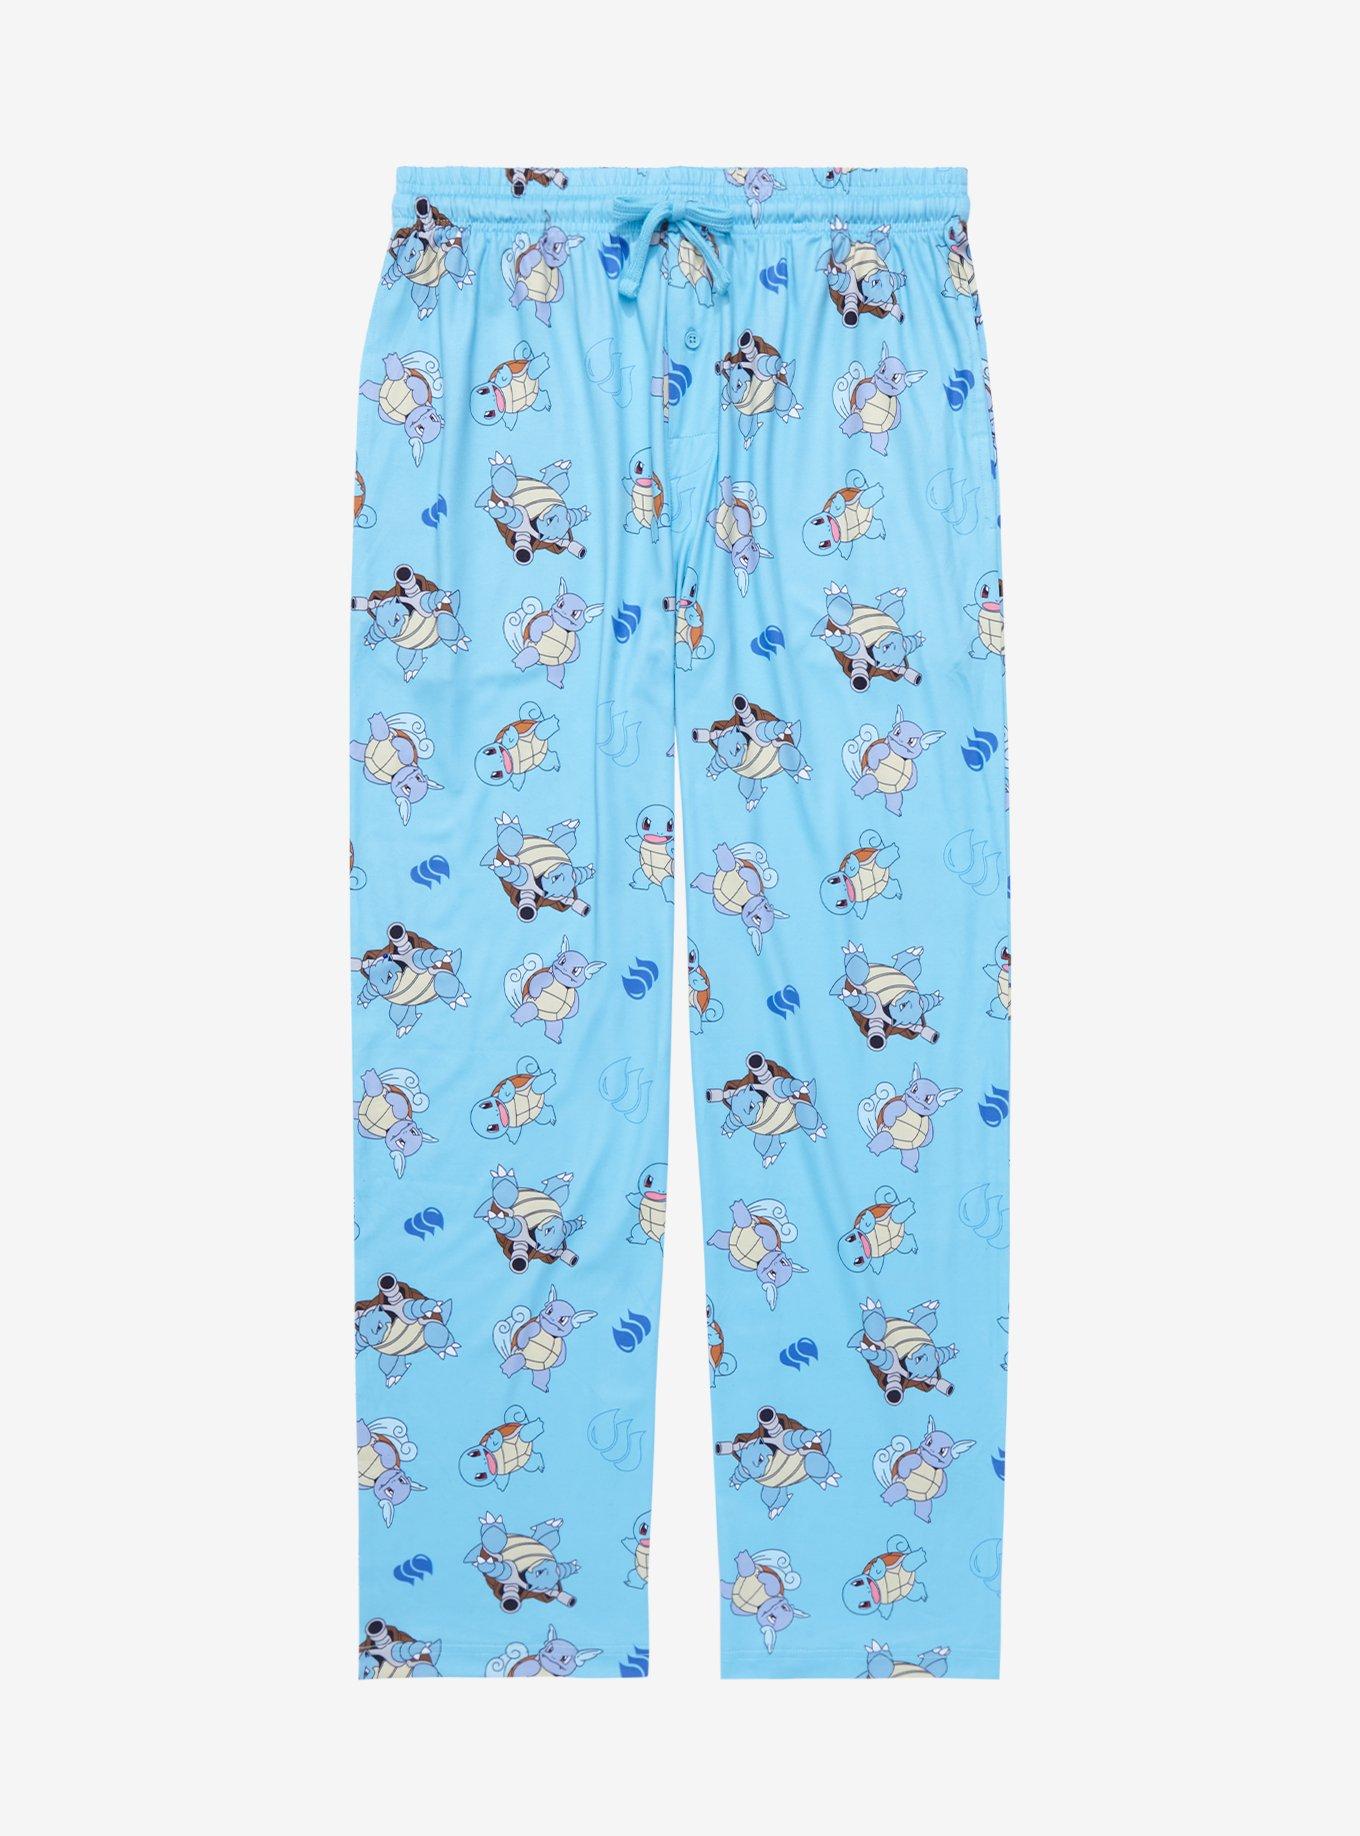 Pokémon Squirtle Evolutions Allover Print Sleep Pants - BoxLunch Exclusive, GREEN, hi-res